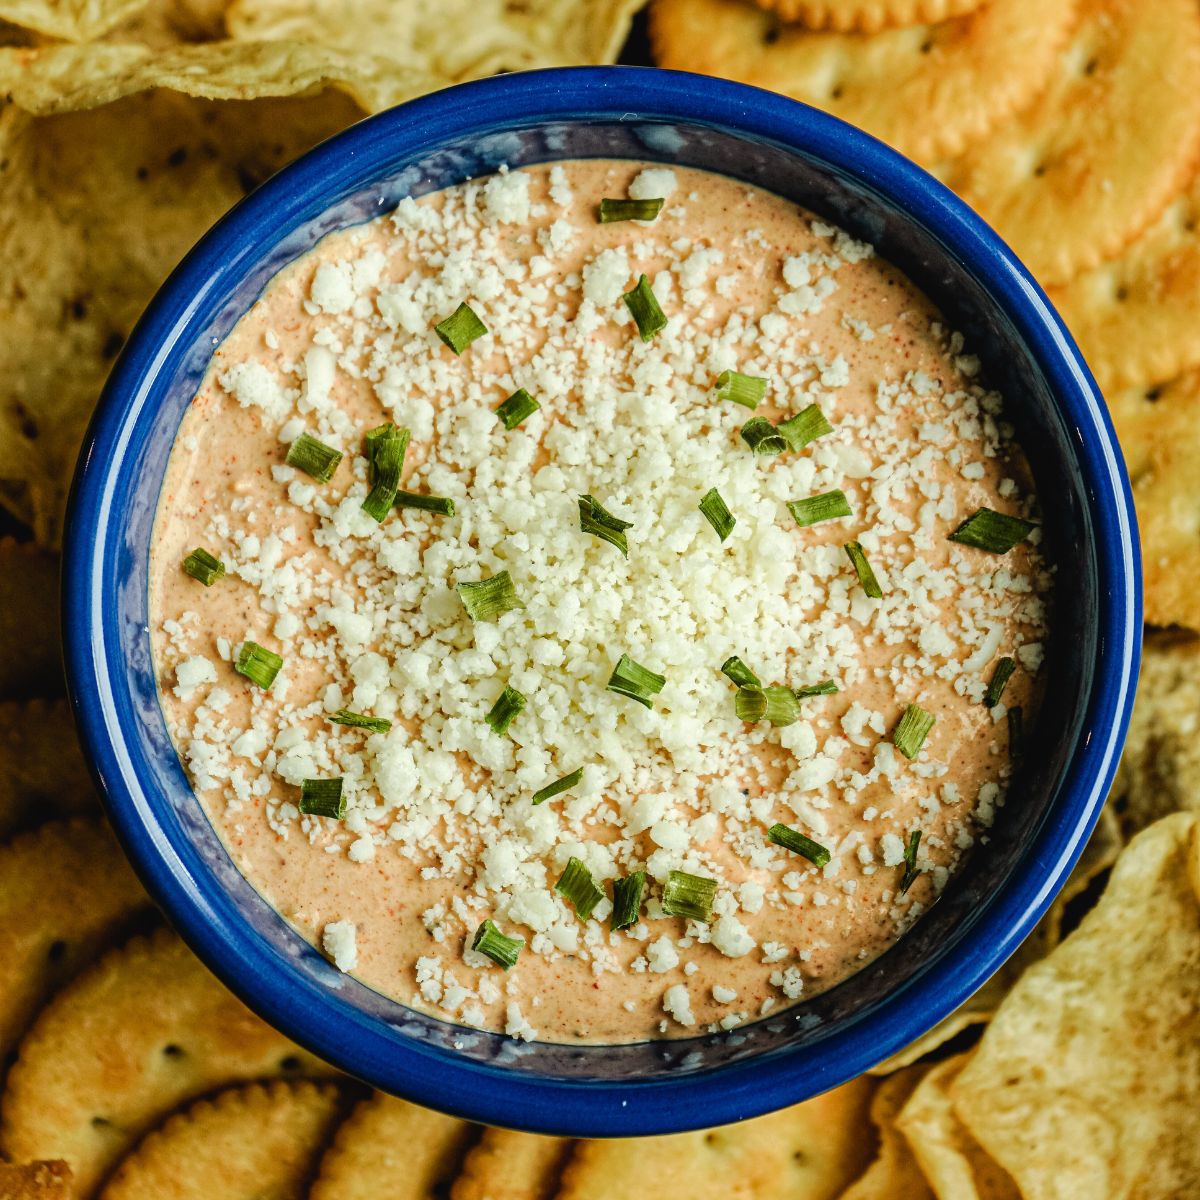 This is easy Mexican sour cream dip in a bowl.